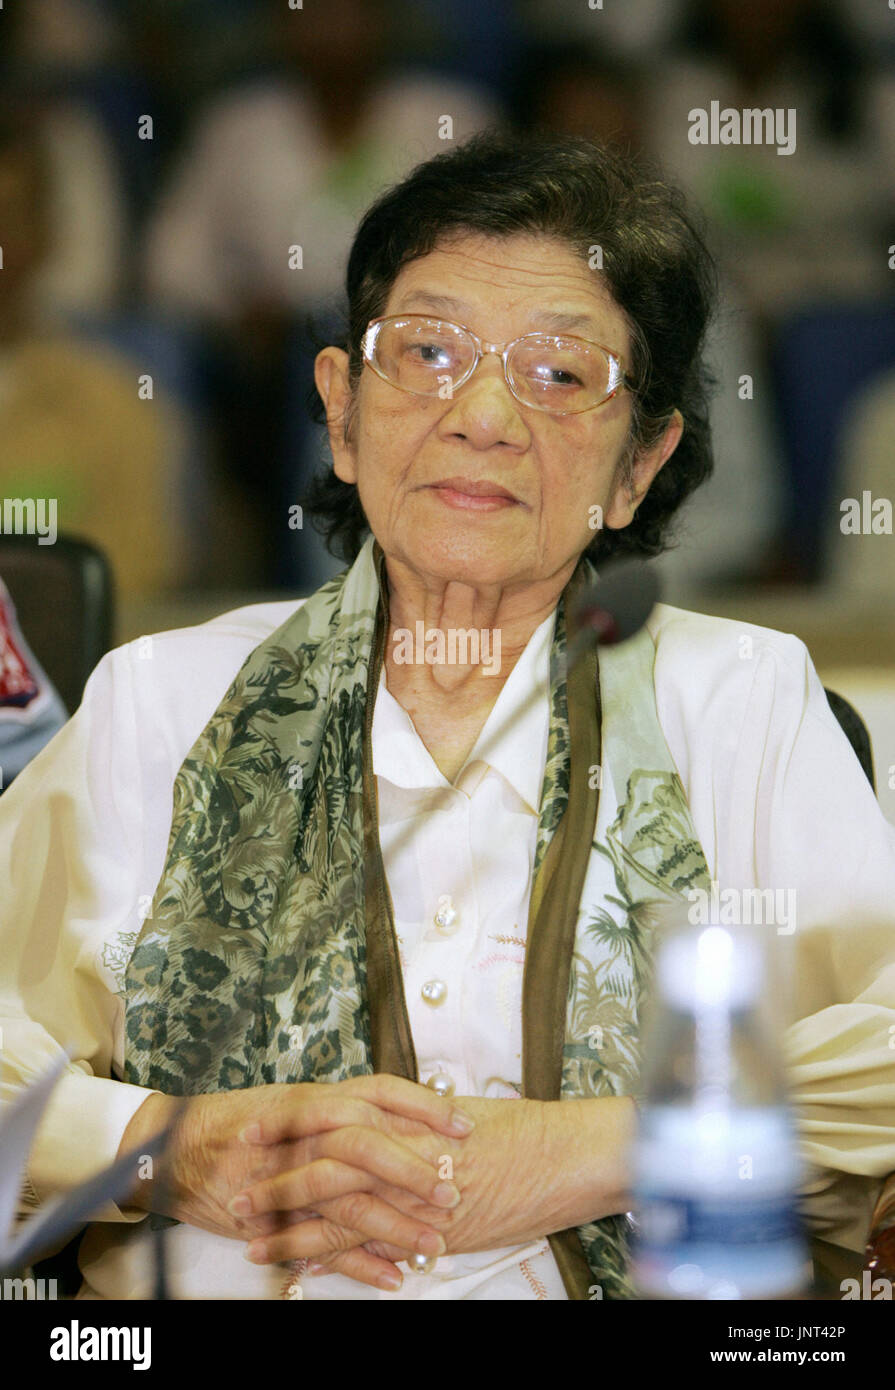 PHNOM PENH, Cambodia - Ieng Thirith, a former Khmer Rouge minister of social affairs, attends a public hearing at the U.N.-backed tribunal at the Extraordinary Chambers in the Courts of Cambodia on the outskirts of Phnom Penh on April 30, 2010. The court decided to keep her, her husband Ieng Sary, former Khmer Rouge foreign minister, and Khieu Samphan, former Khmer Rouge head of state, in detention for another year. (Kyodo) Stock Photo